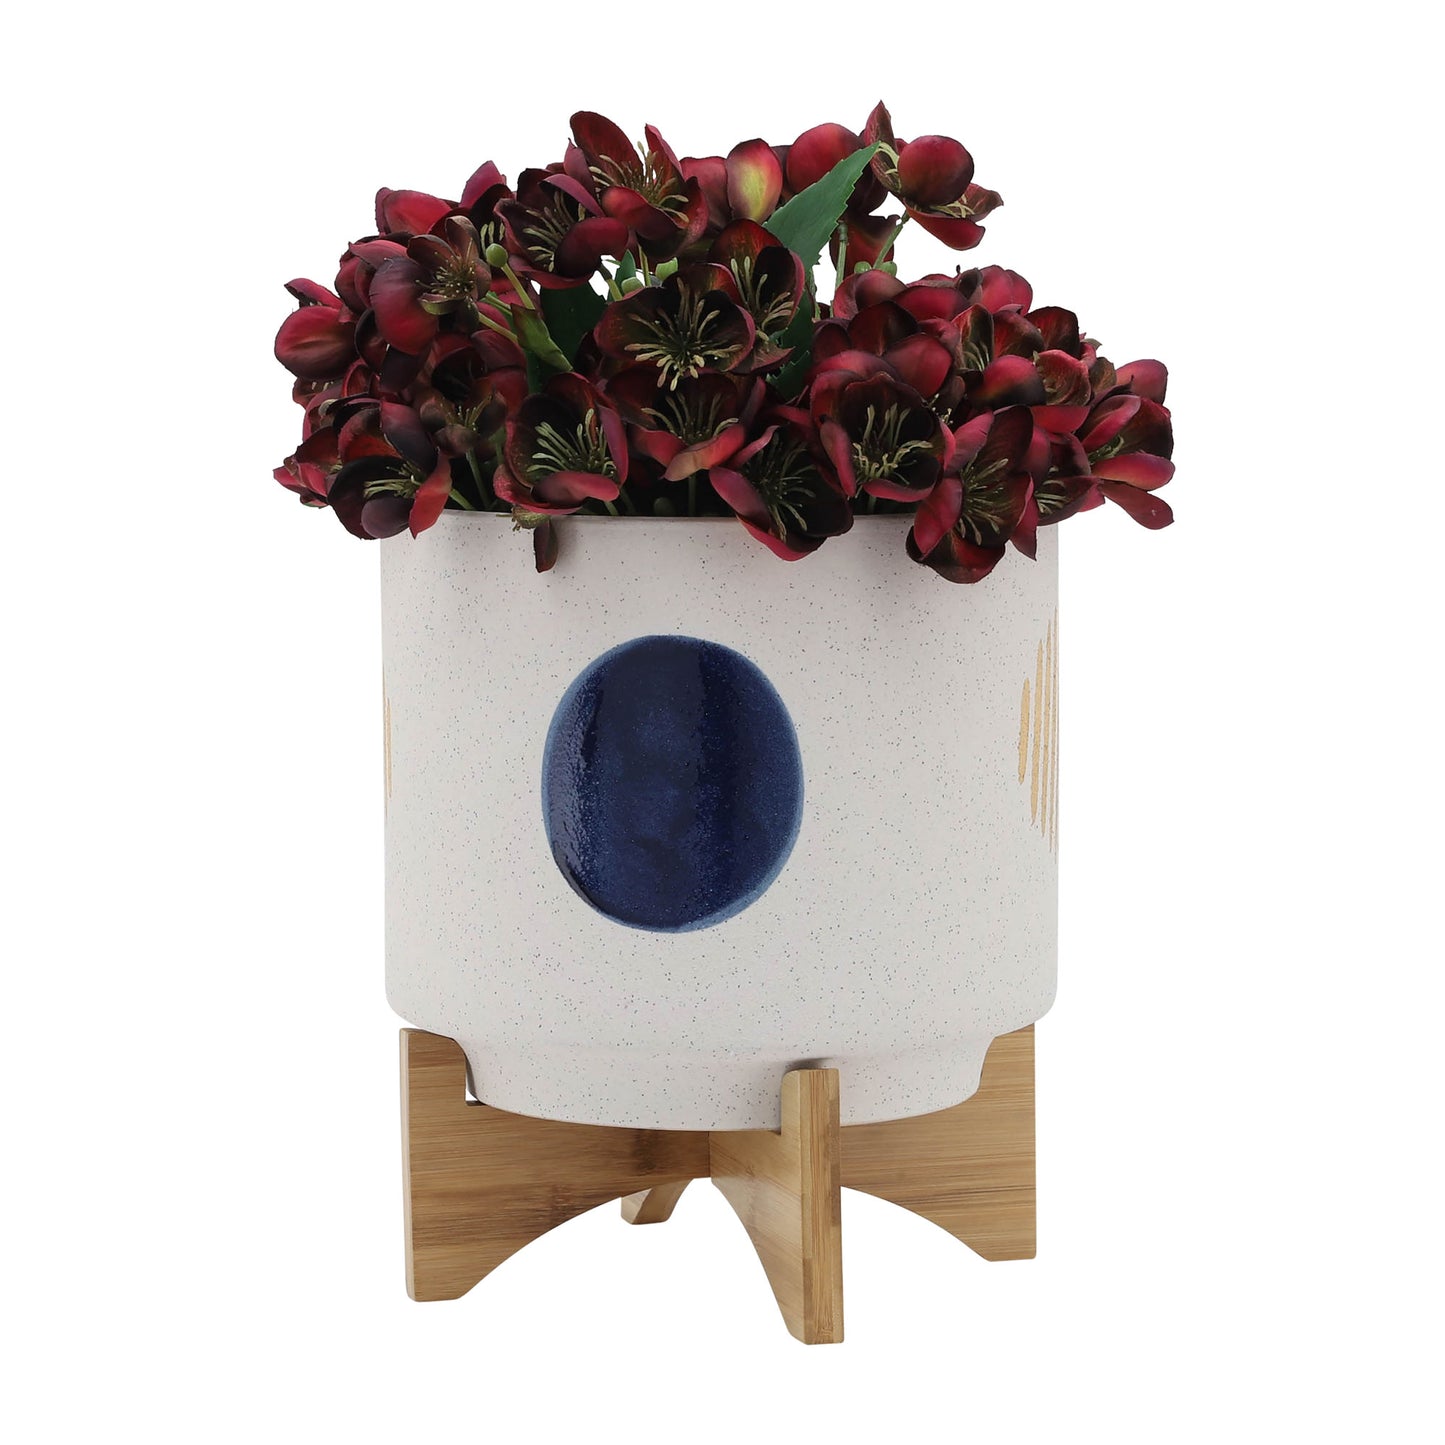 10" FUNKY PLANTER W/ STAND, WHITE